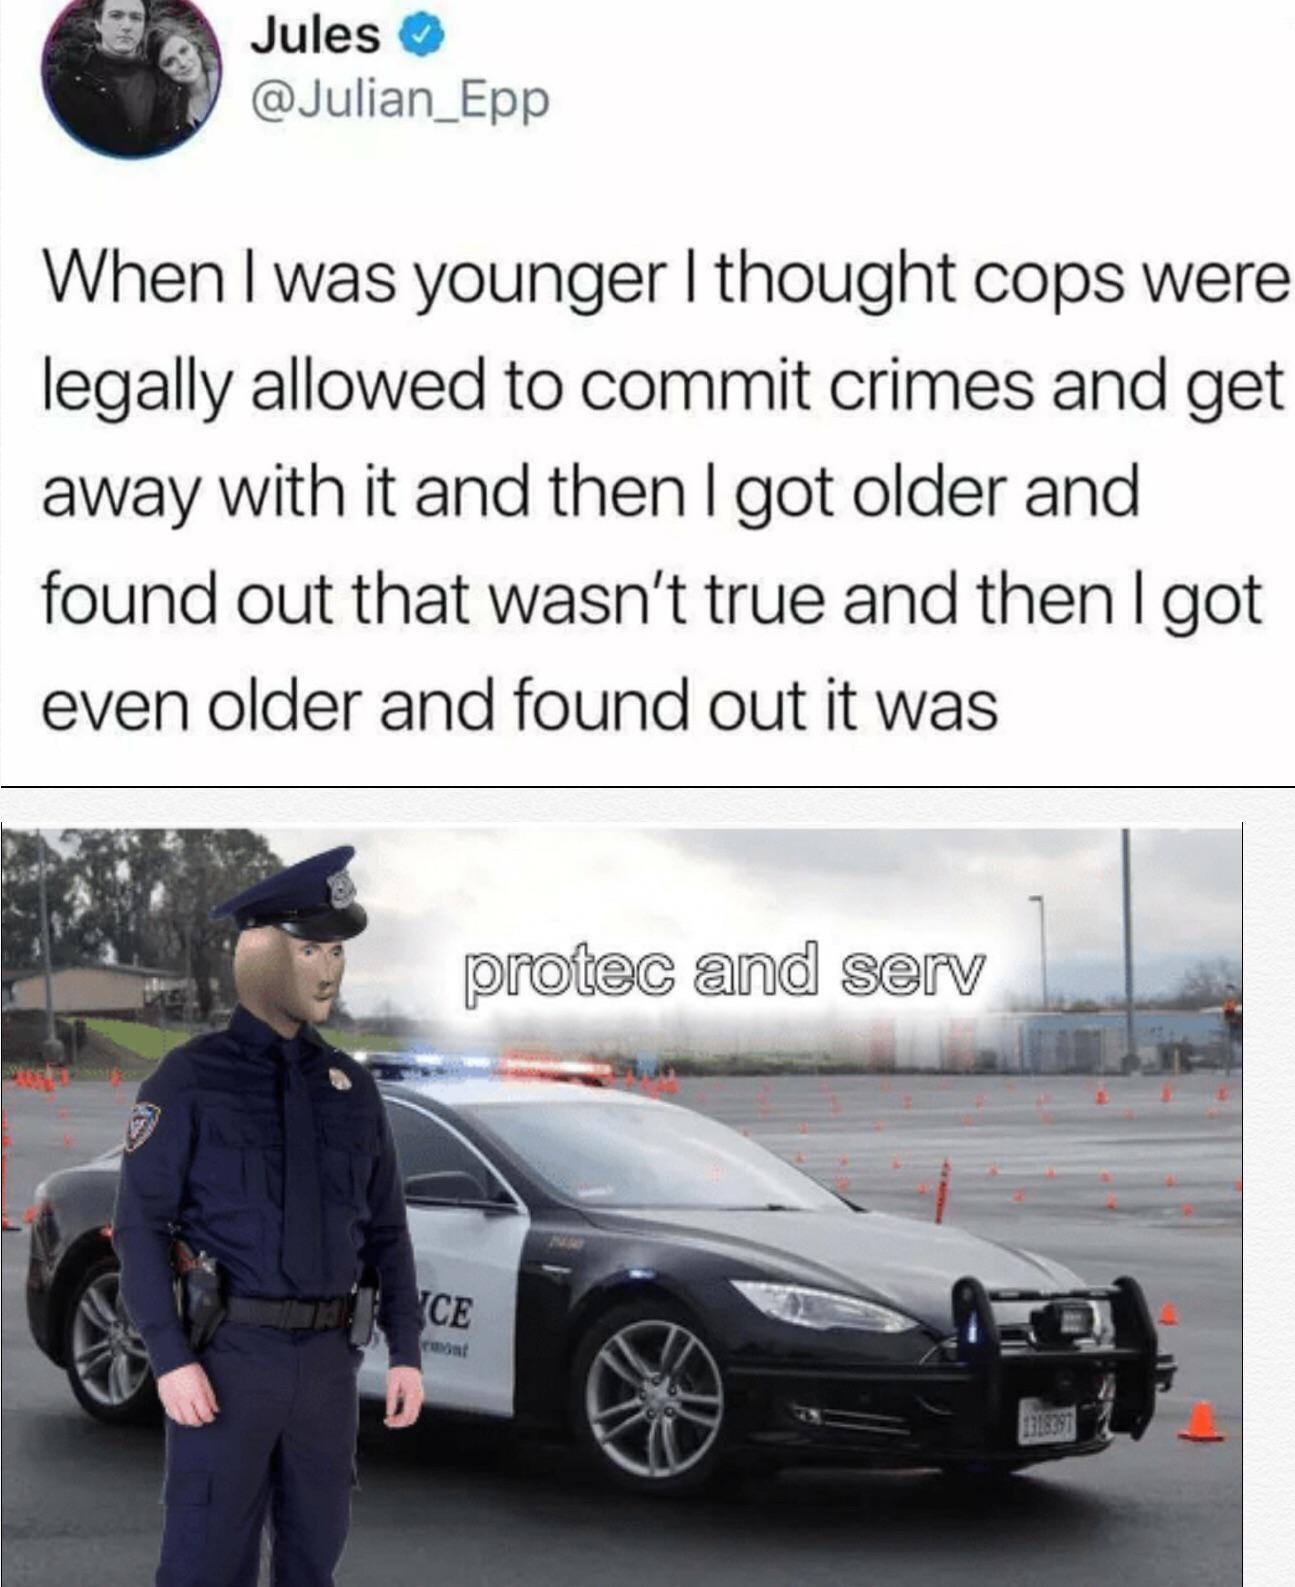 protec and serv - Jules When I was younger I thought cops were legally allowed to commit crimes and get away with it and then I got older and found out that wasn't true and then I got even older and found out it was protec and serv Yce